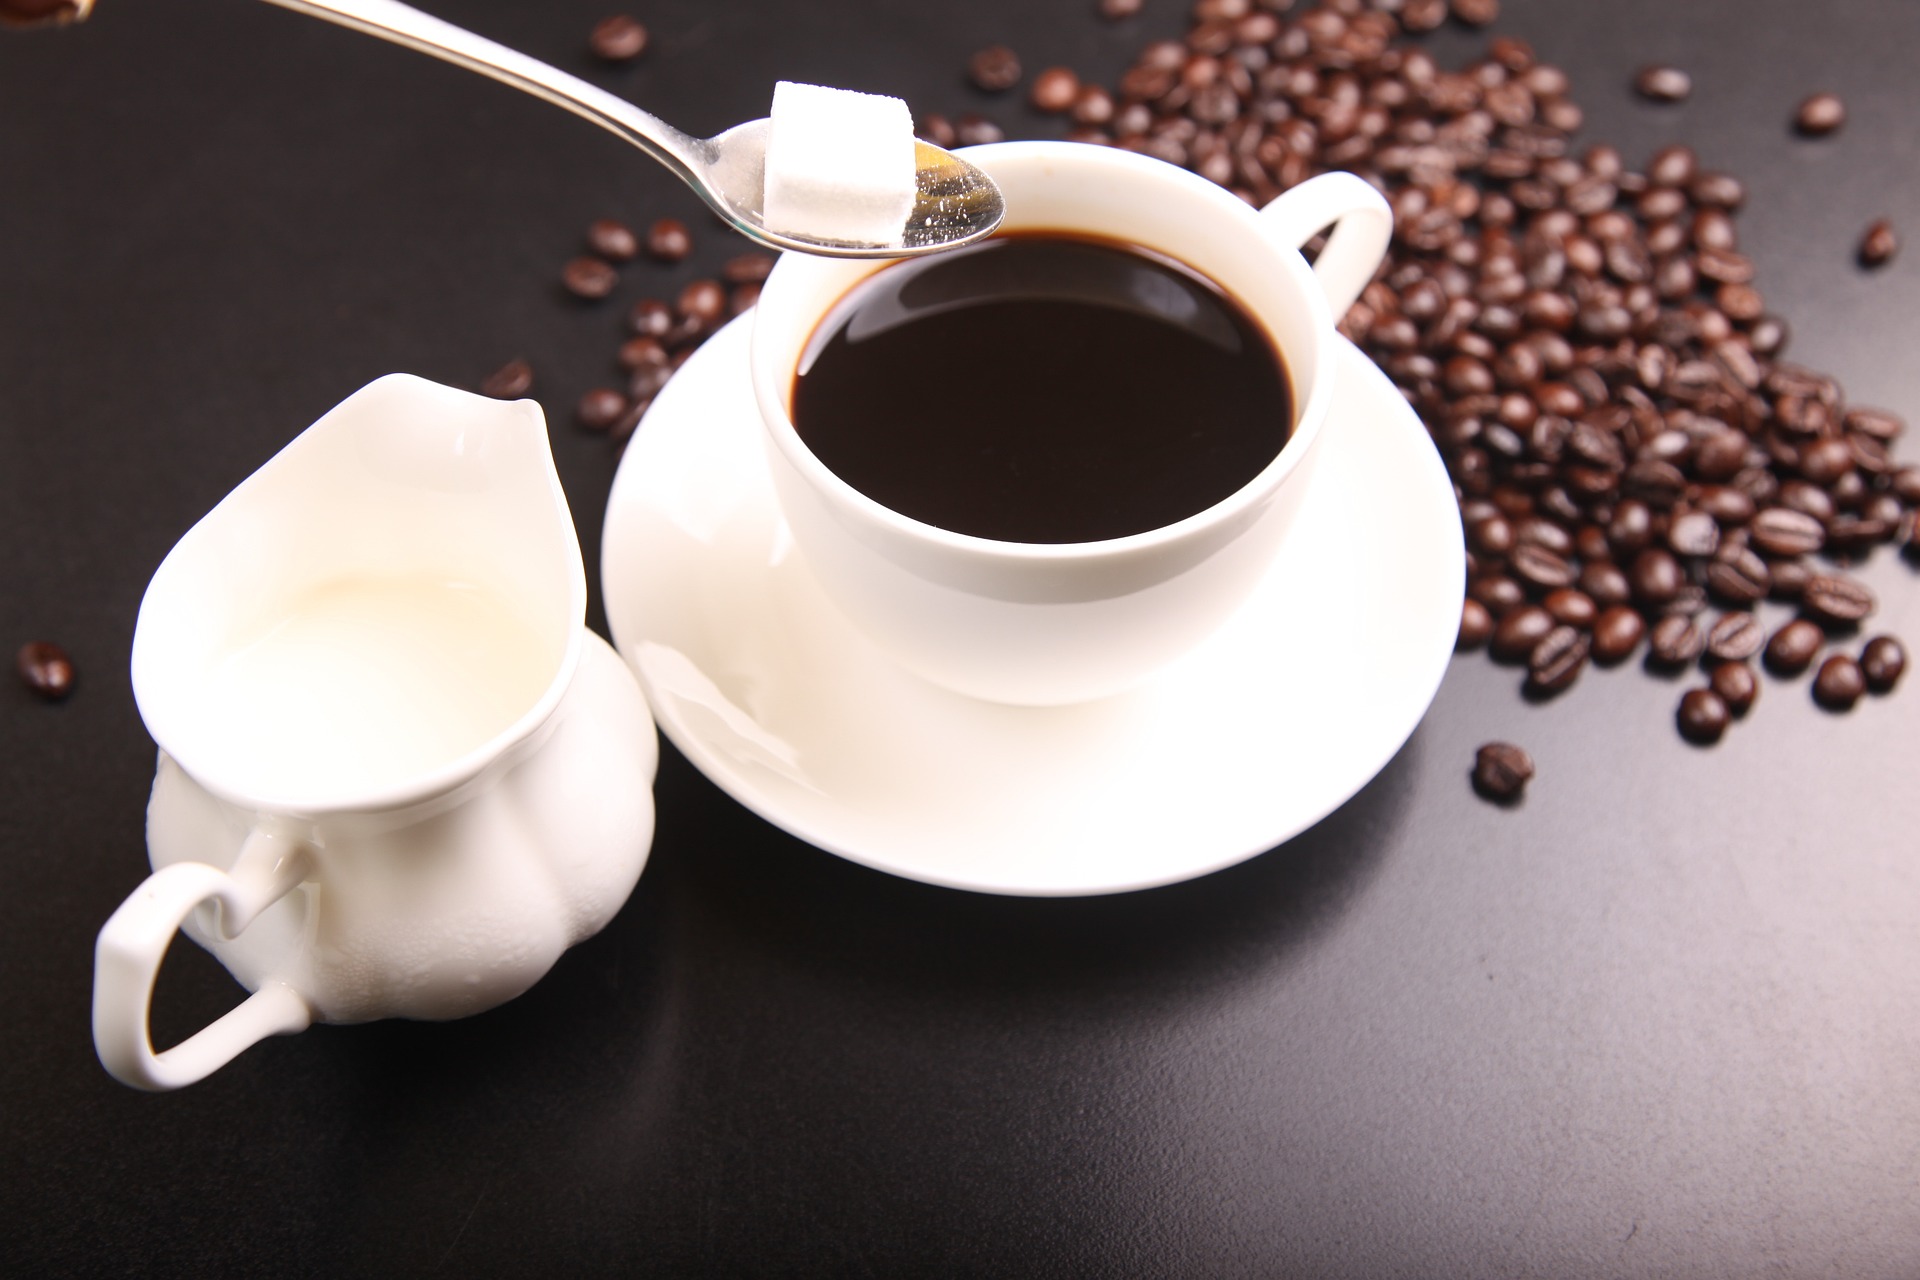 The coffee afterward: Why coffee after a meal is not a good idea